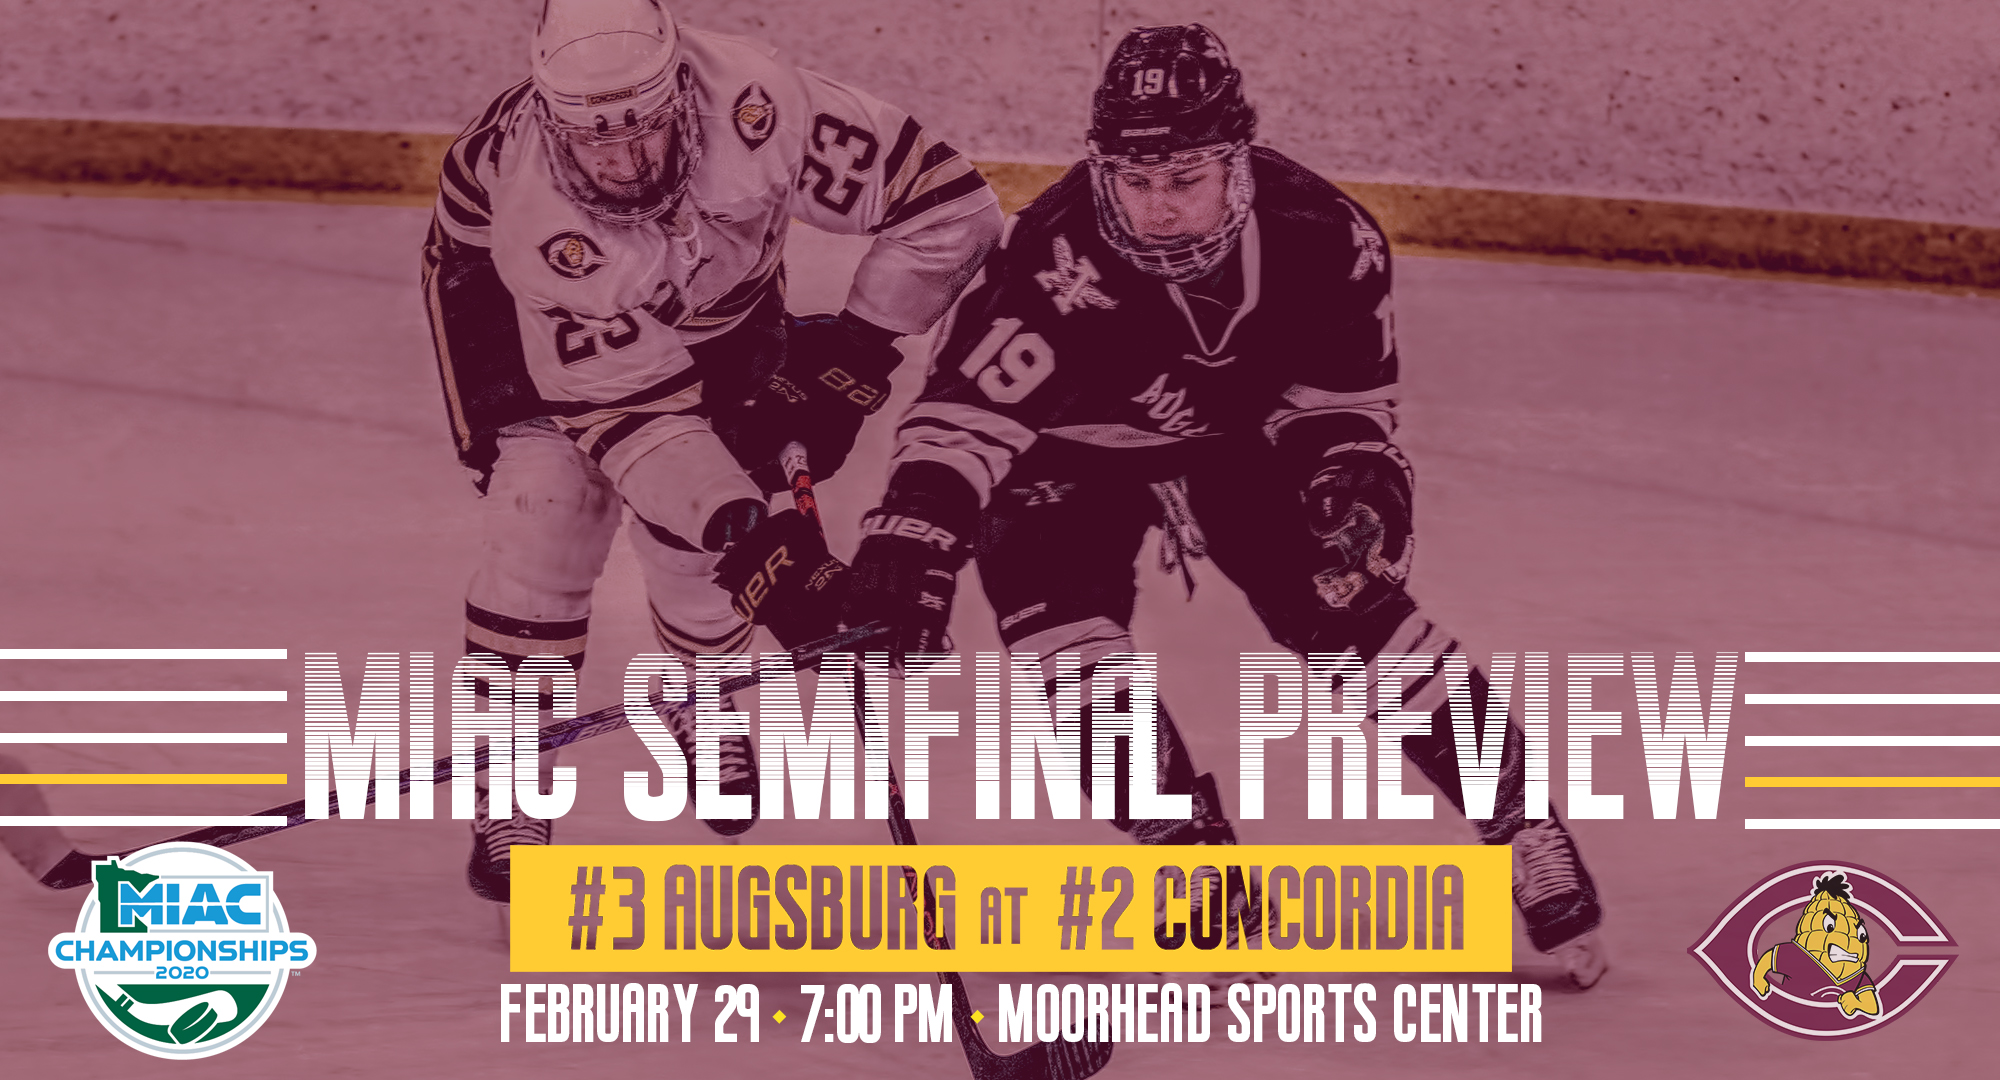 Concordia hosts Augsburg in the semifinals of the MIAC playoffs.